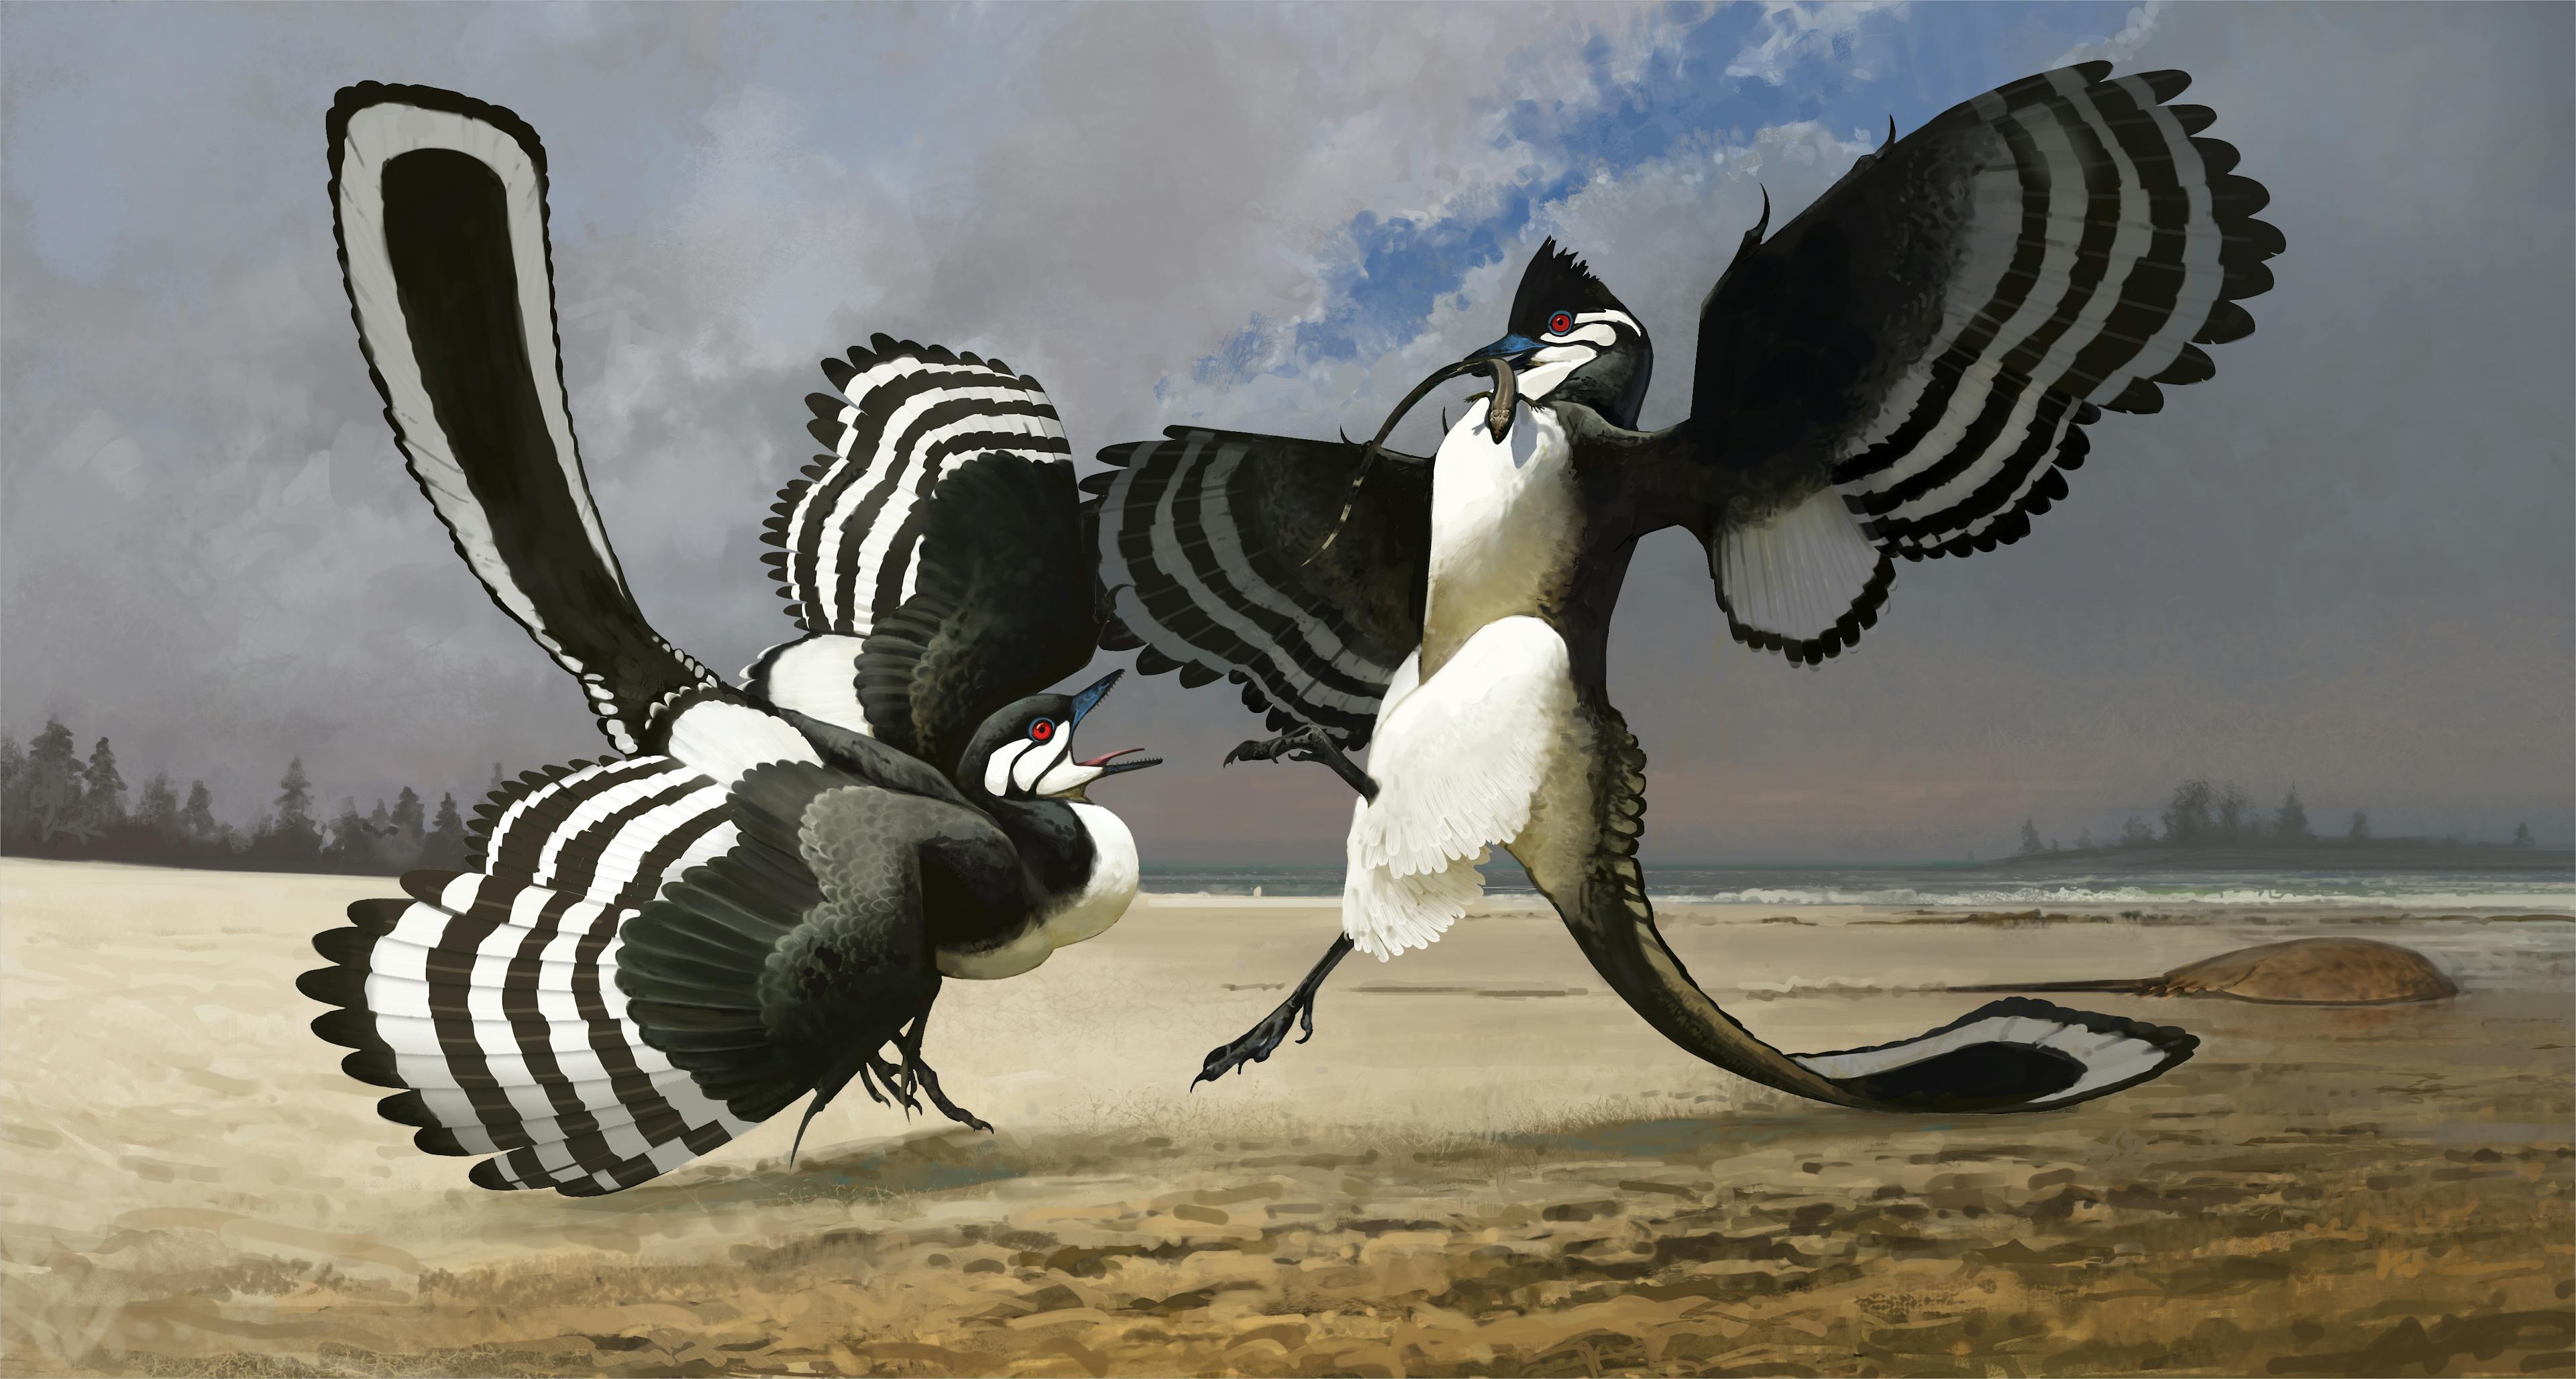 Artist's rendering of two Archaeopteryx fighting over a small lizard that one is holding in its mouth